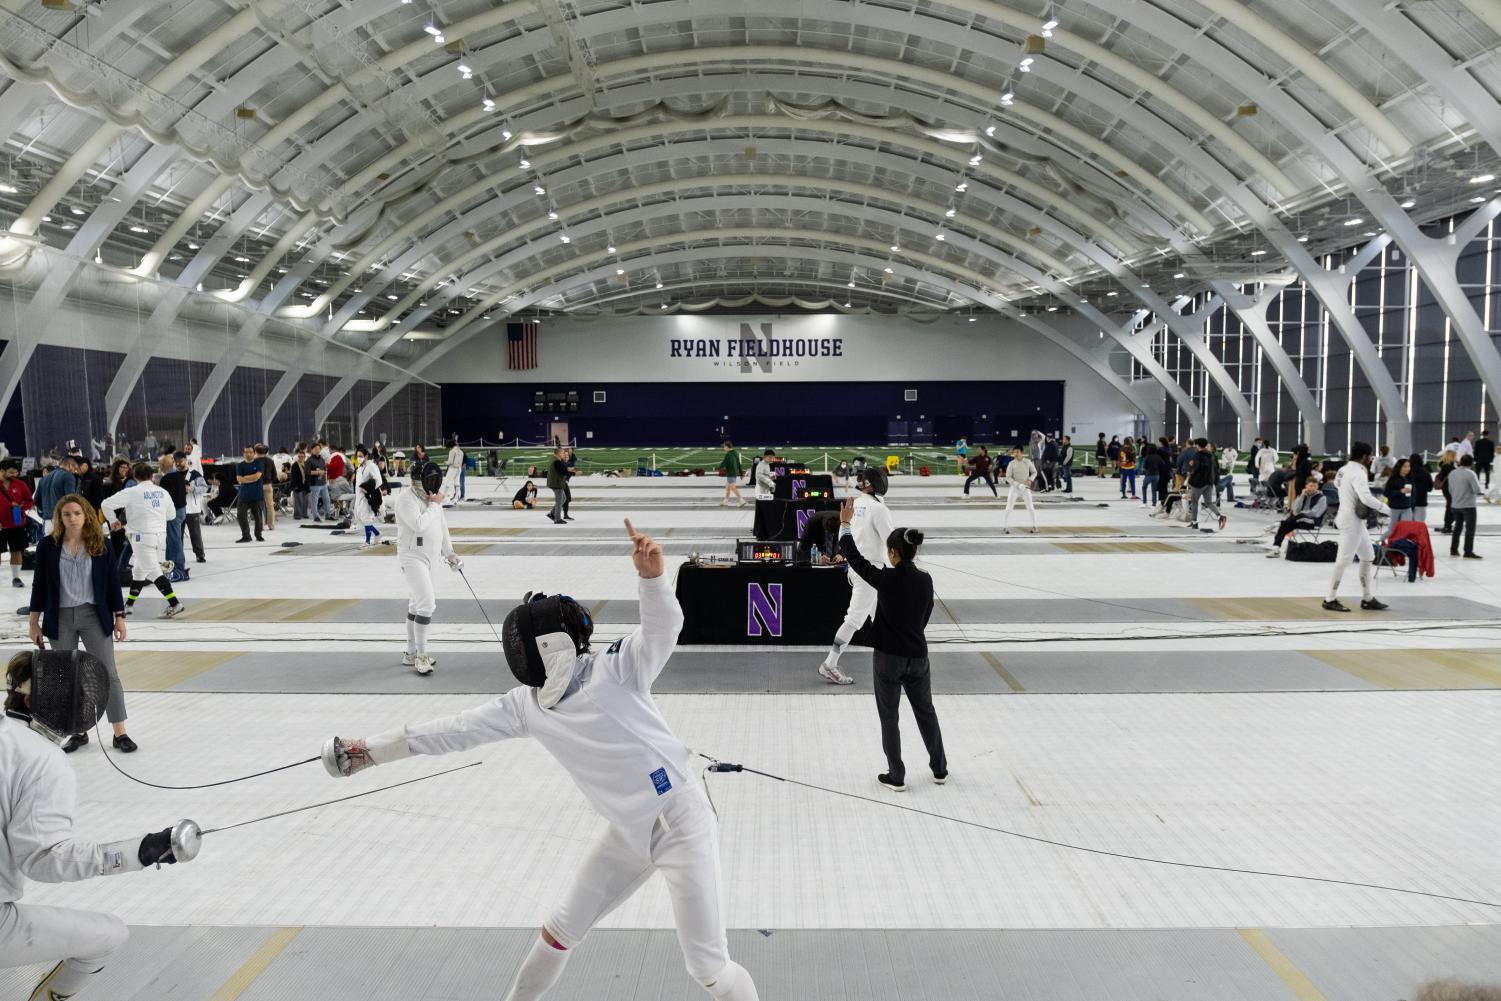 Fencers, referees and onlookers mill about in a large room with a curved roof.